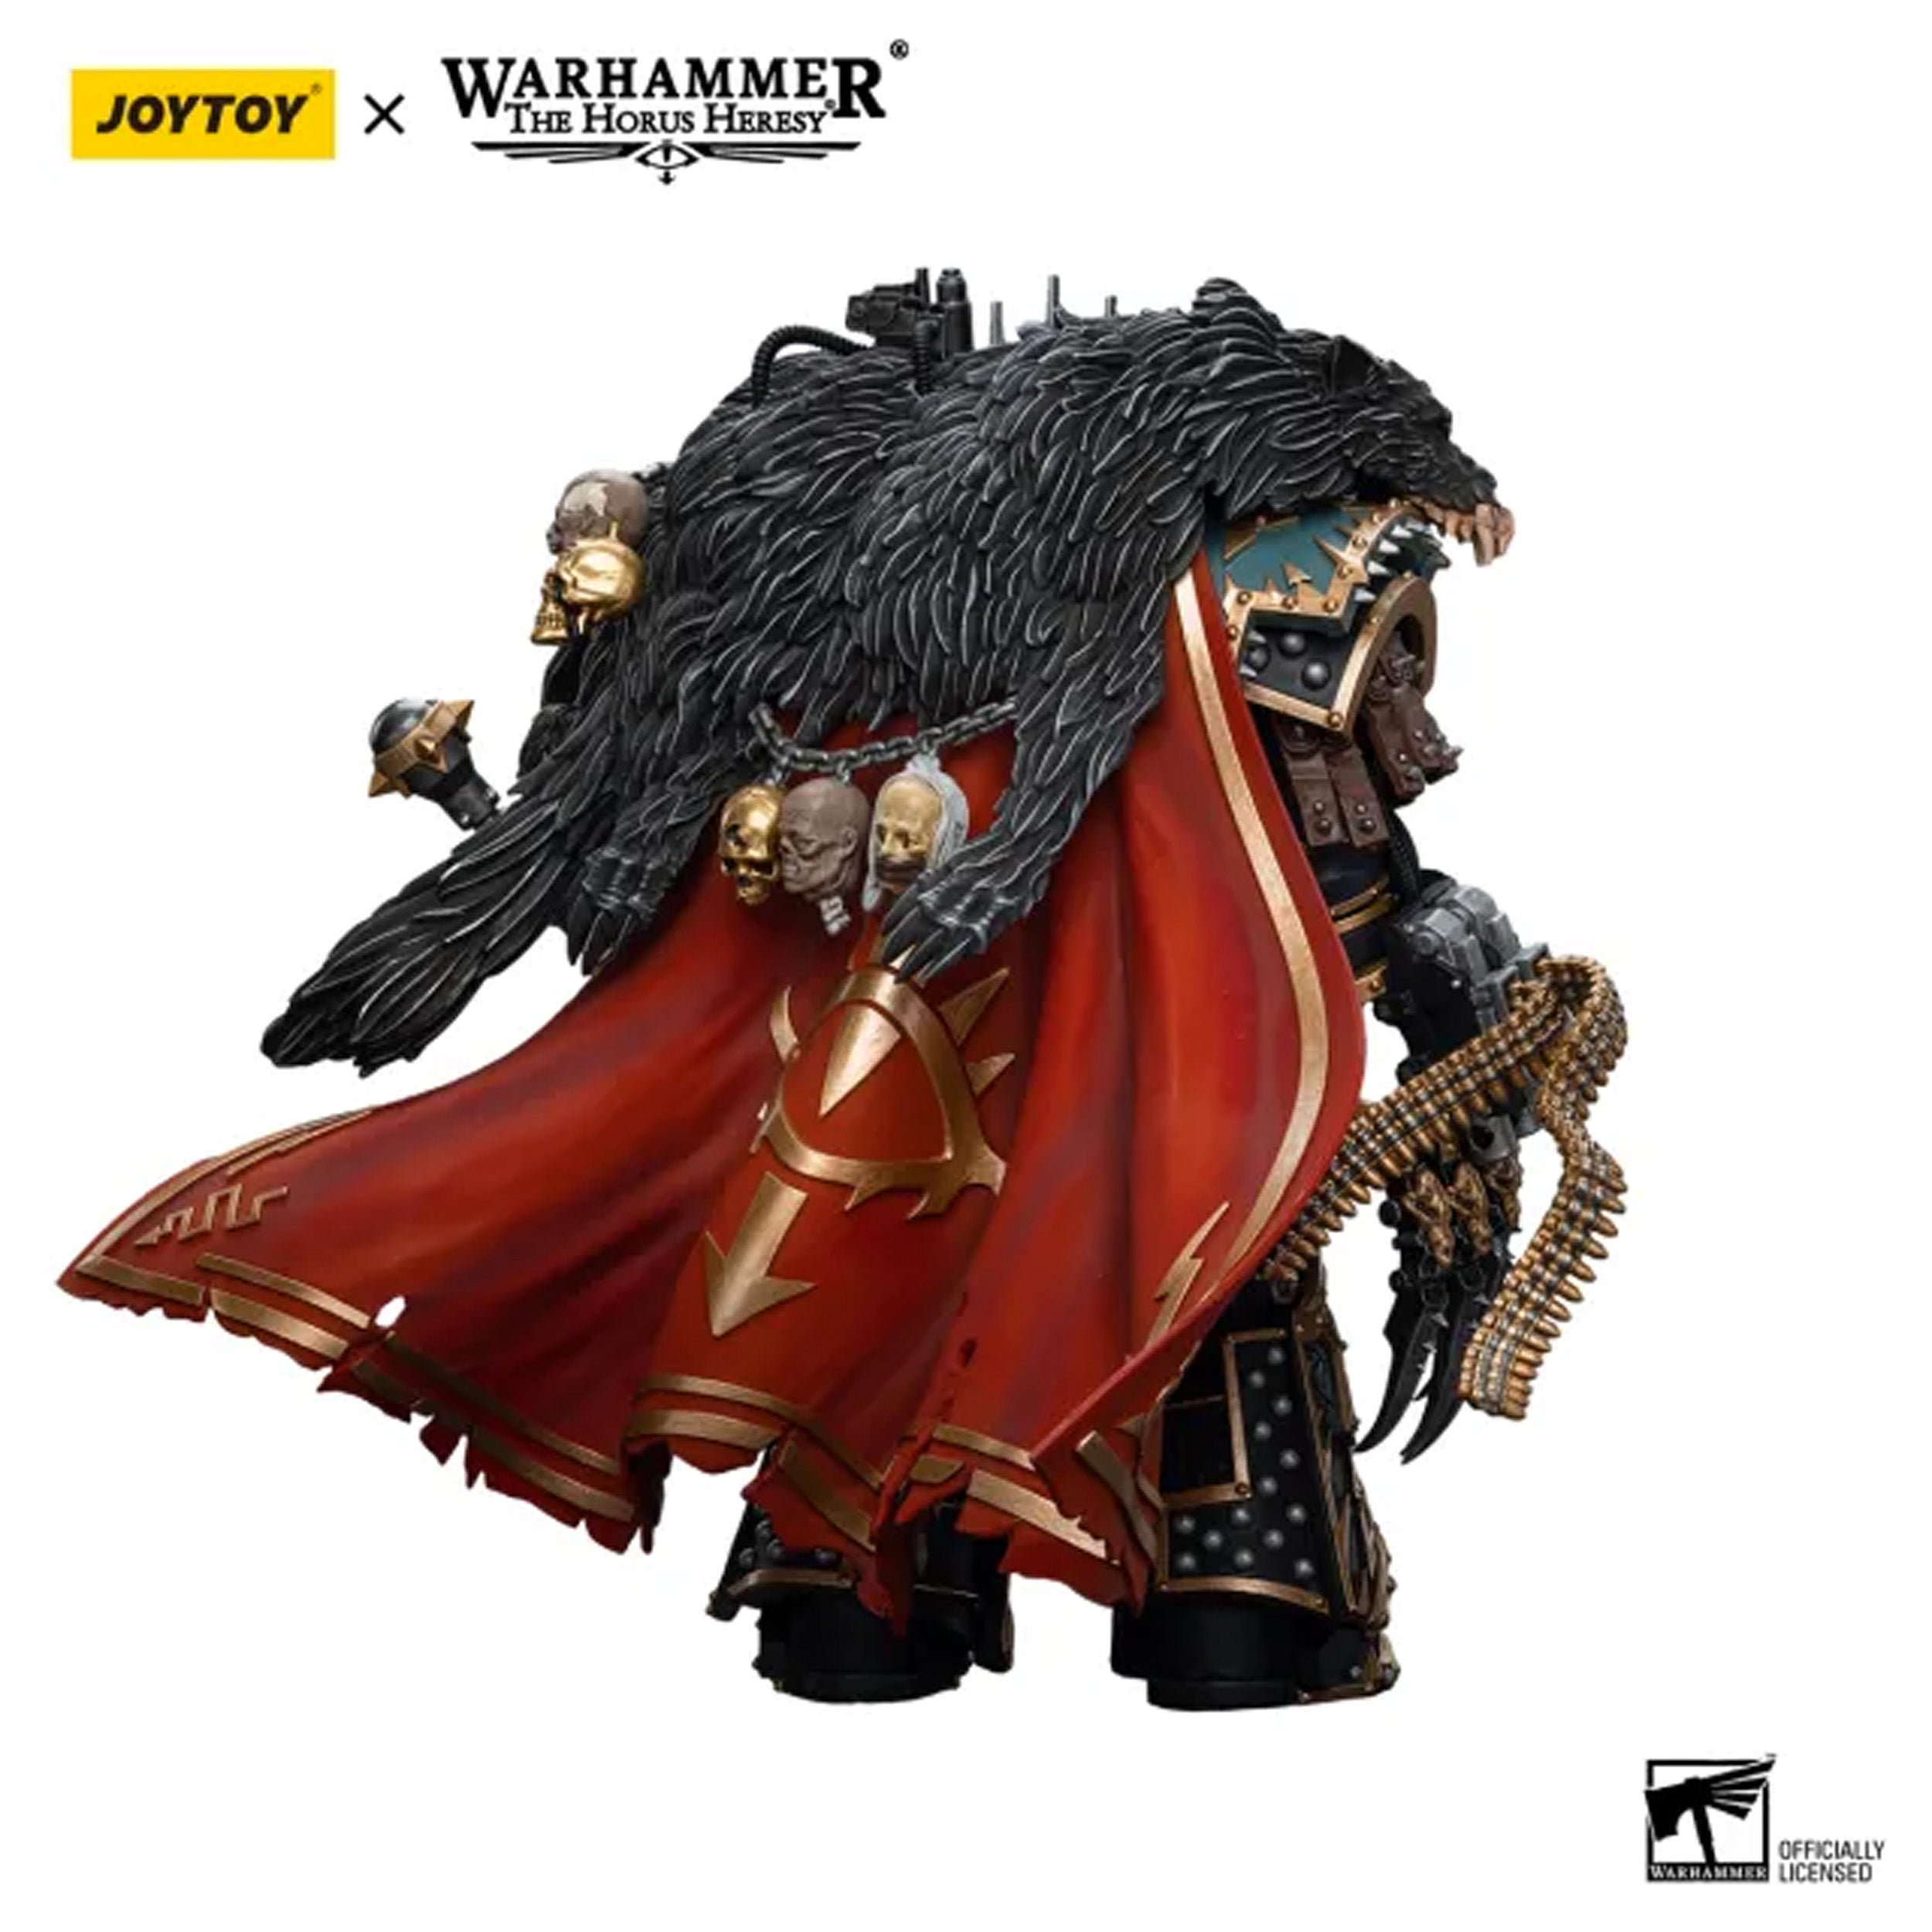 Joy Toy - JT9787 - Warhammer 40,000 - Sons of Horus - Warmaster Horus, Primarch of the XVIth Legion (1/18 Scale) - Marvelous Toys